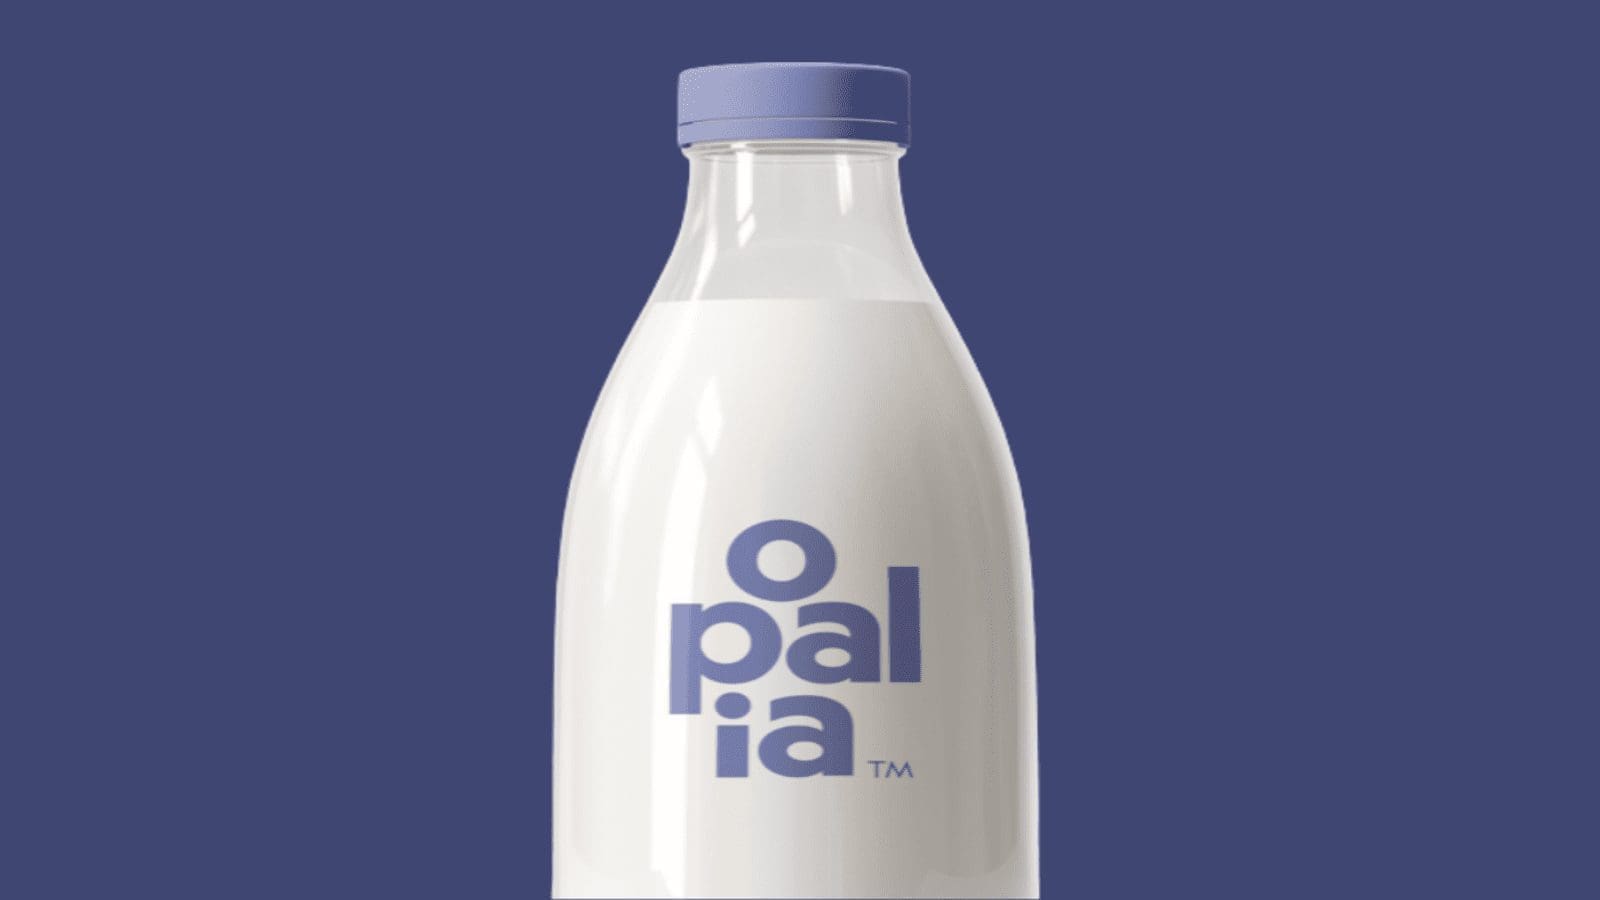 Opalia pioneers cell-based milk production in Canada